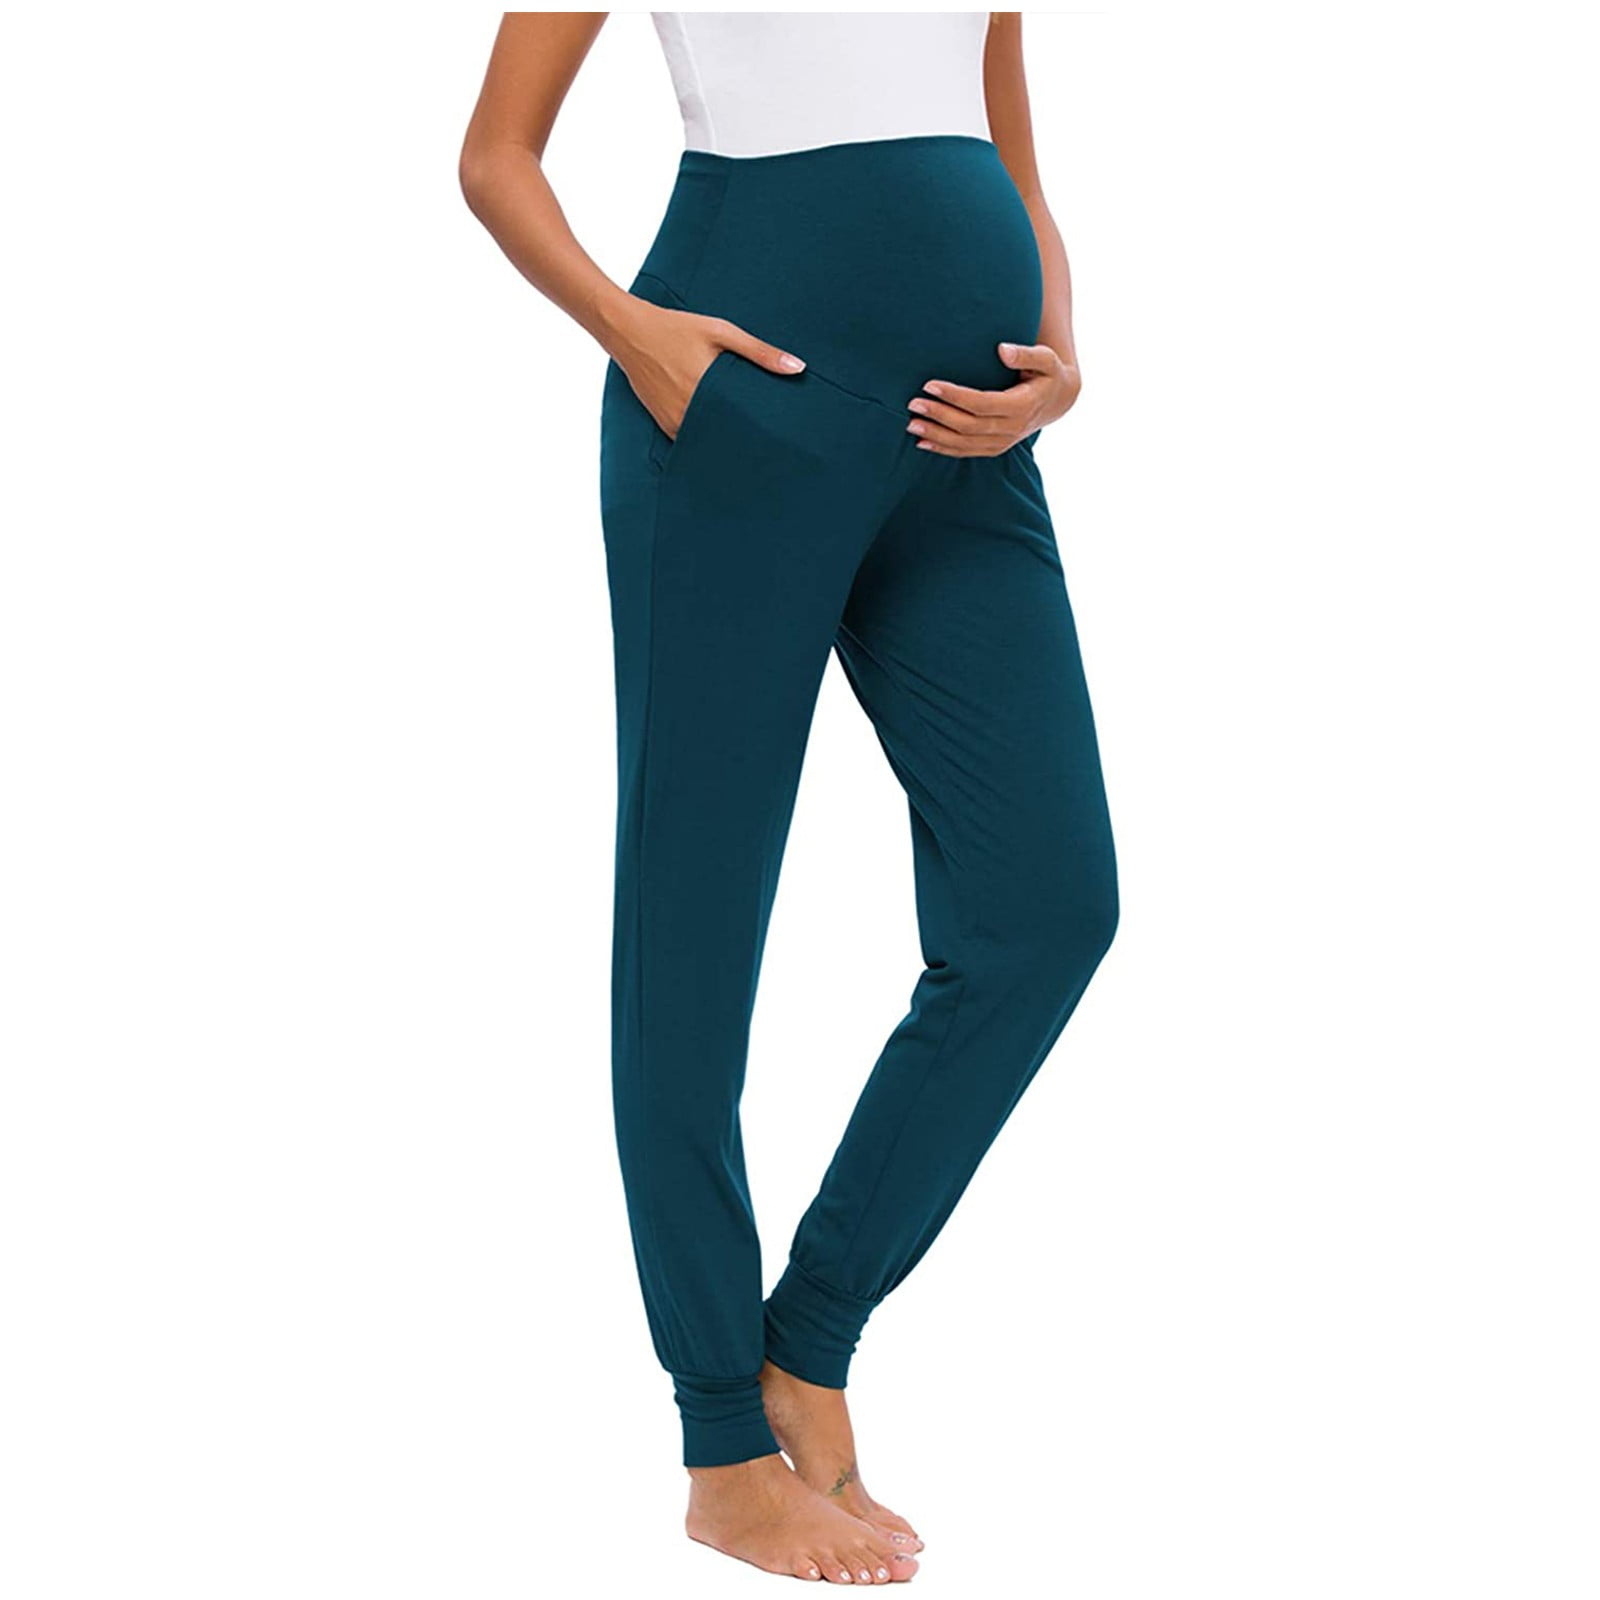 TUOBARR Maternity Clothes Maternity Women's Solid Color Casual Pants  Stretchy Comfortable Lounge Pants 